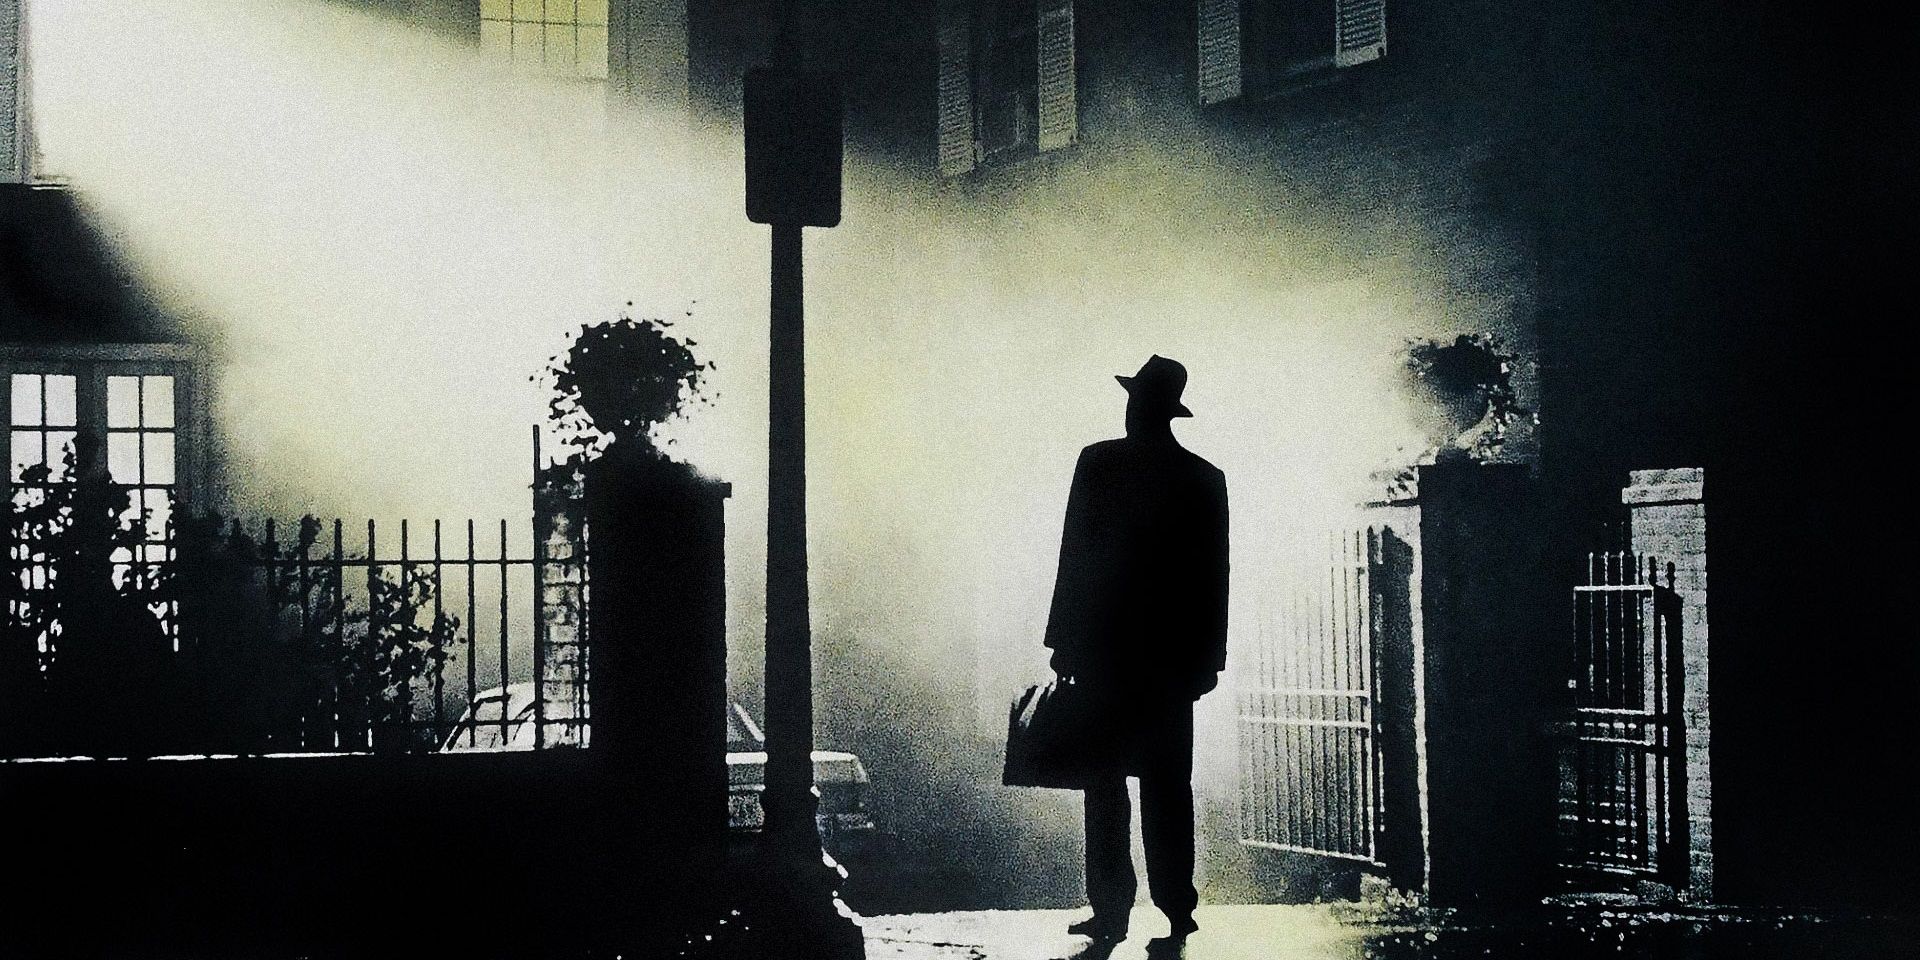 A priest stands in the light of a lamp post from the Exorcist 